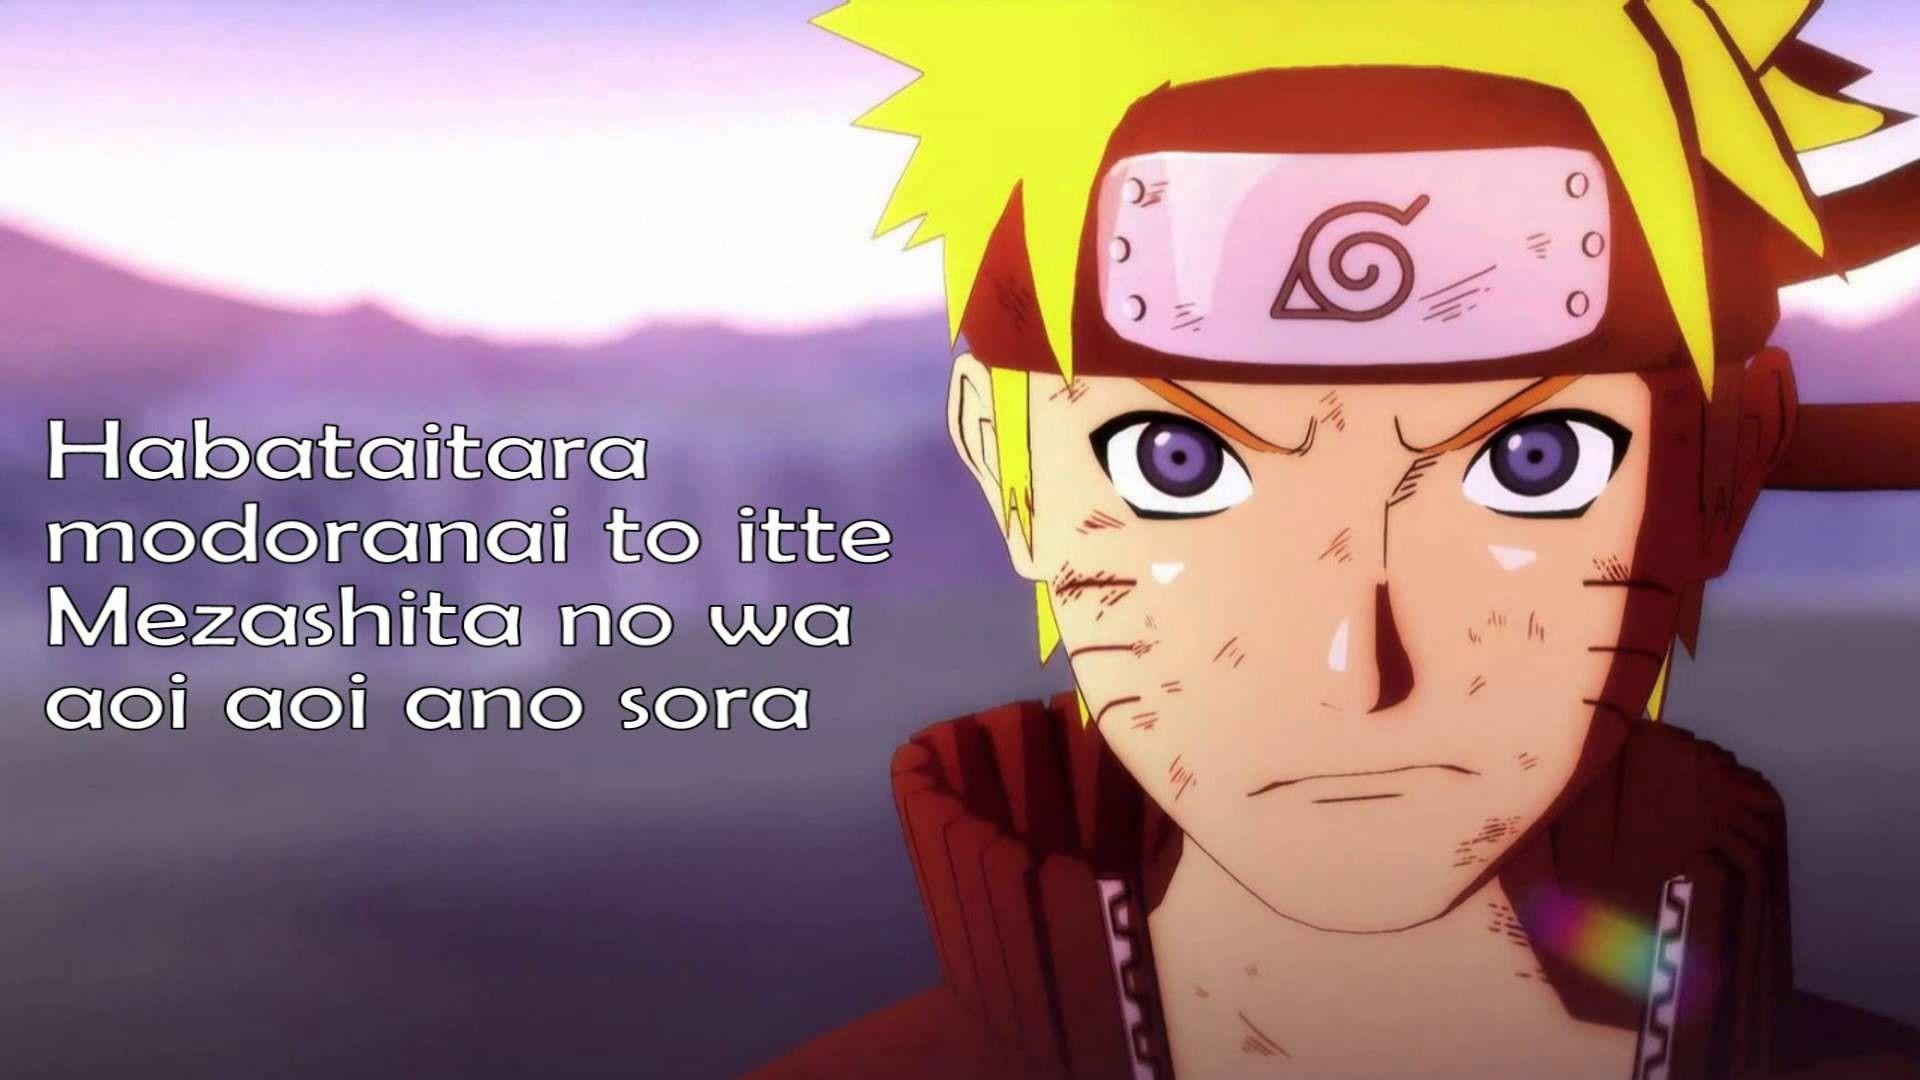 15 Quotes that can change the way you look at Things  Naruto Uzumaki   YouTube